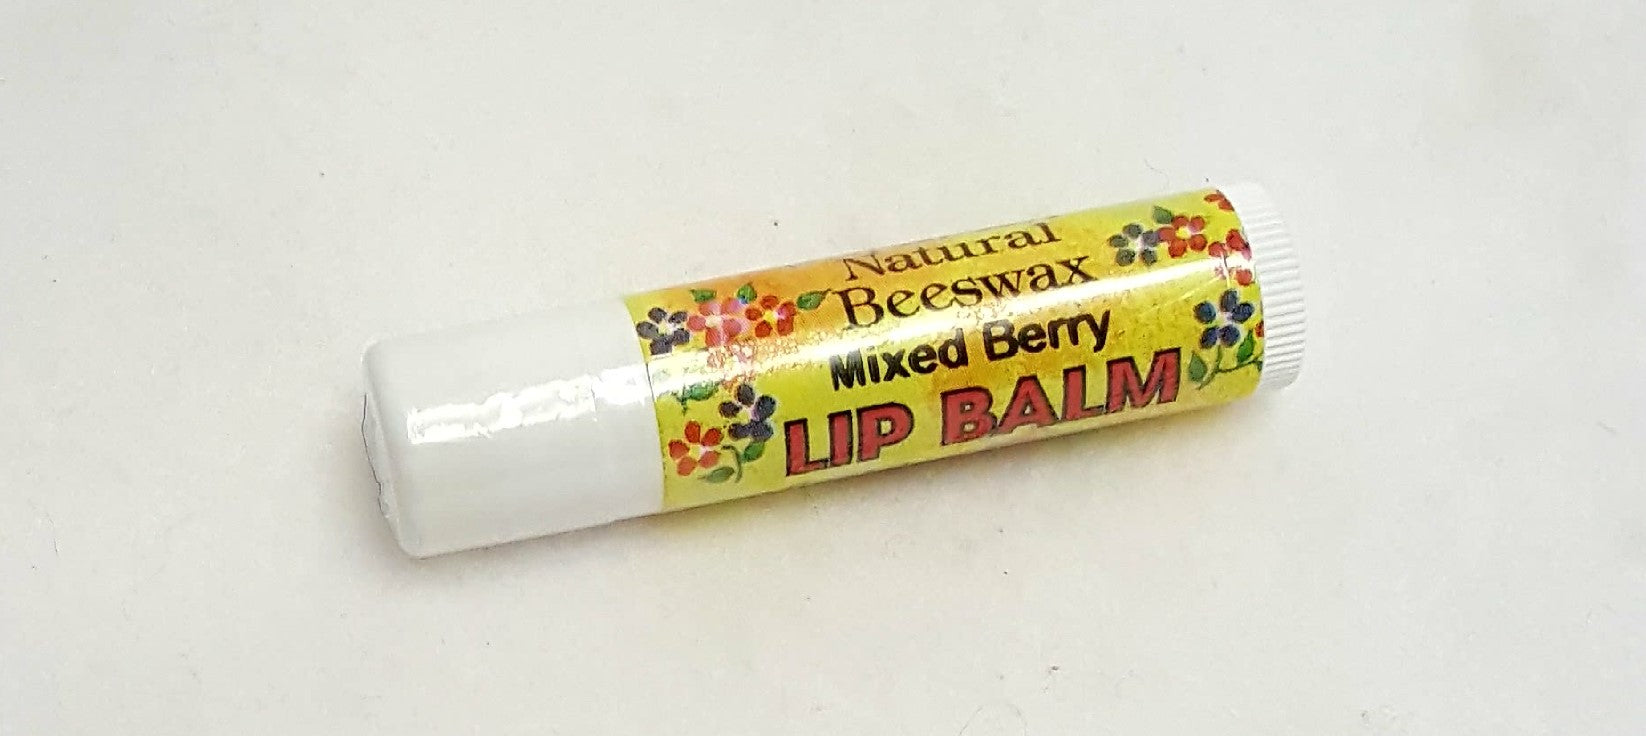 For sweet and fruity lips, try "Mixed Berry" lip balm.